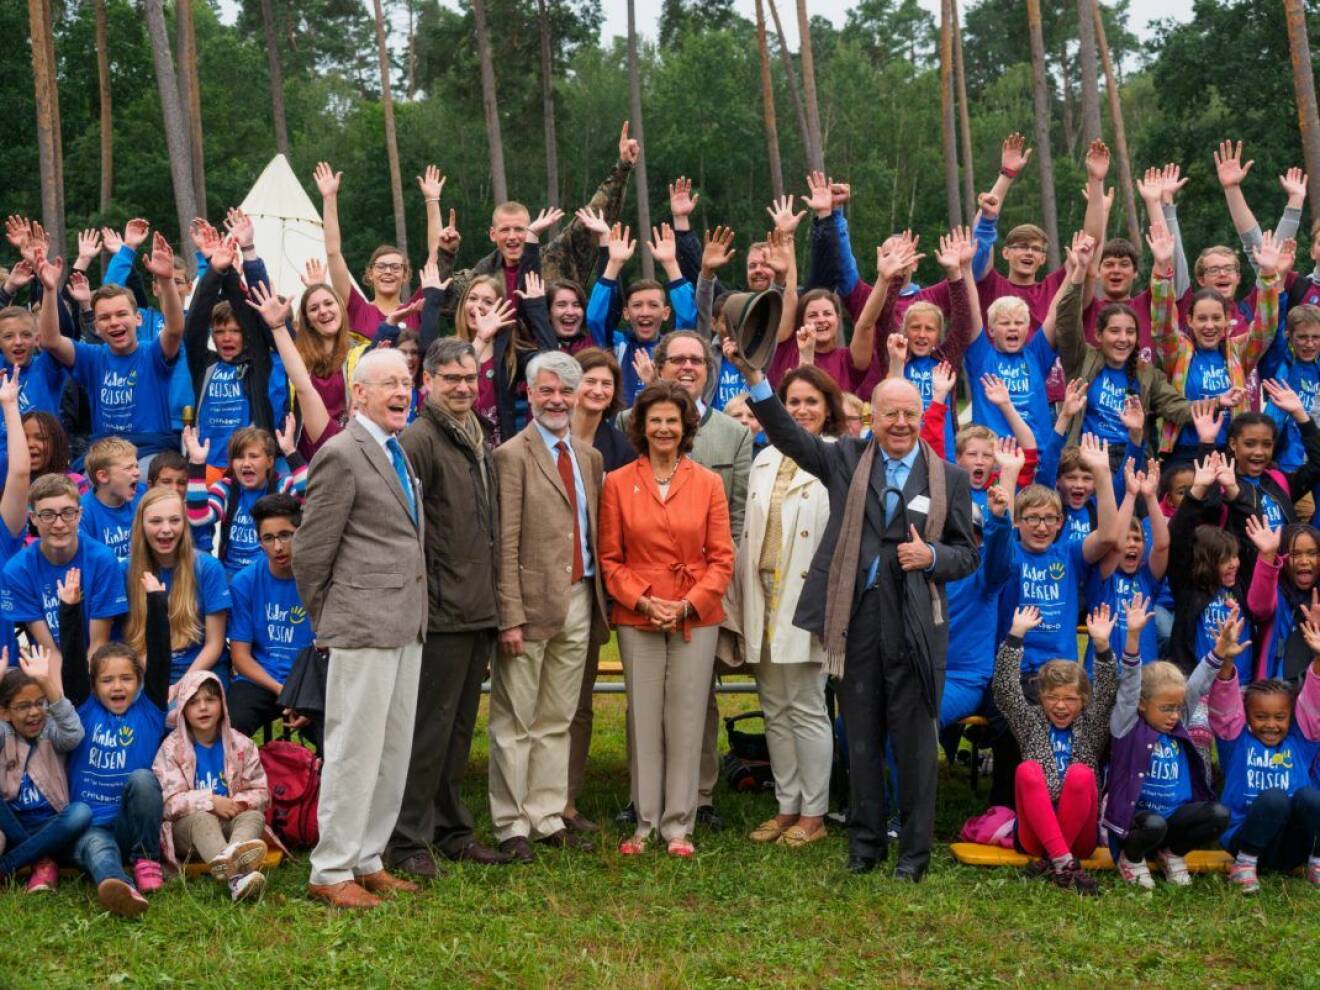 Queen Silvia of Sweden poses with children for a group photo at the Erlebnispark Thurn adventure park in Heroldsbach, Germany, 2 August 2016. Queen Silvia of Sweden visited the children's holiday camp of the German TV lottery at the Schloss Thurn adventure park. PHOTO: NICOLAS ARMER/DPA (c) DPA / IBL Bildbyrå